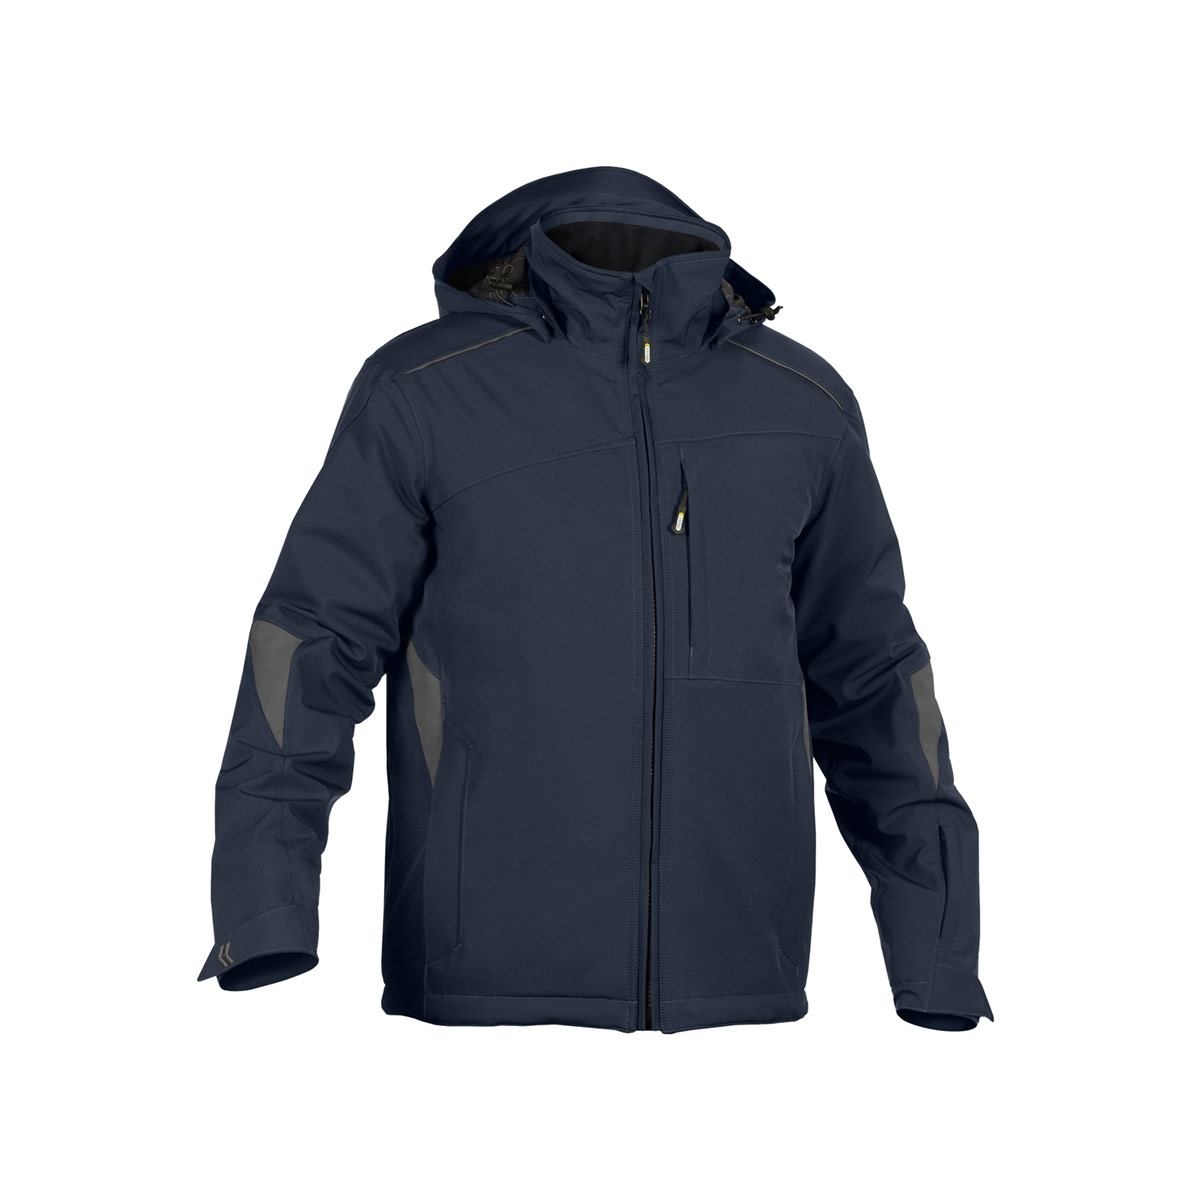 Dassy NORDIX stretch winter jacket waterproof and breathable NORDIX